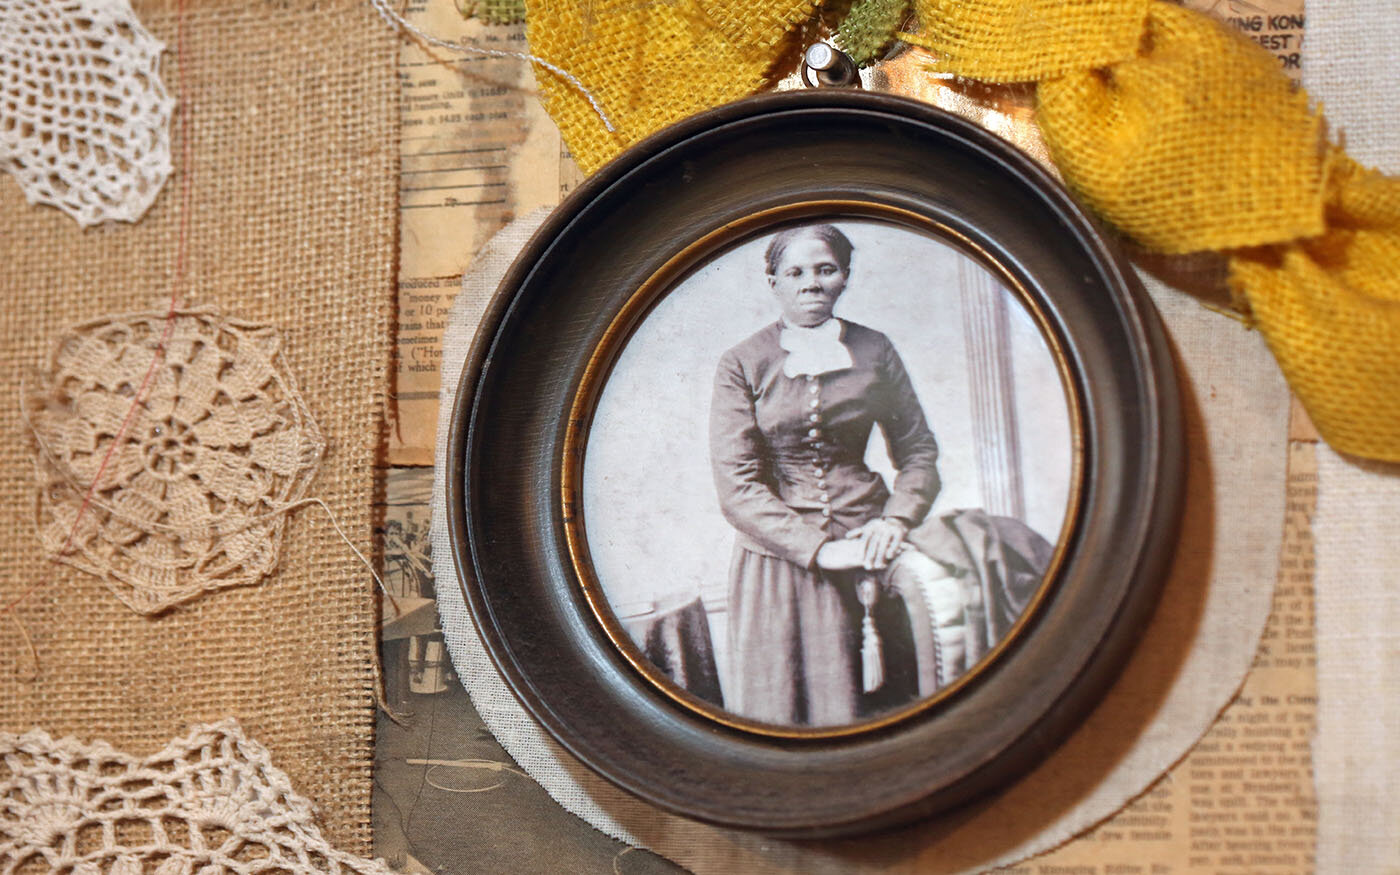 On the wall of Regina Evans’ Oakland studio is this framed photograph of Harriet Tubman.